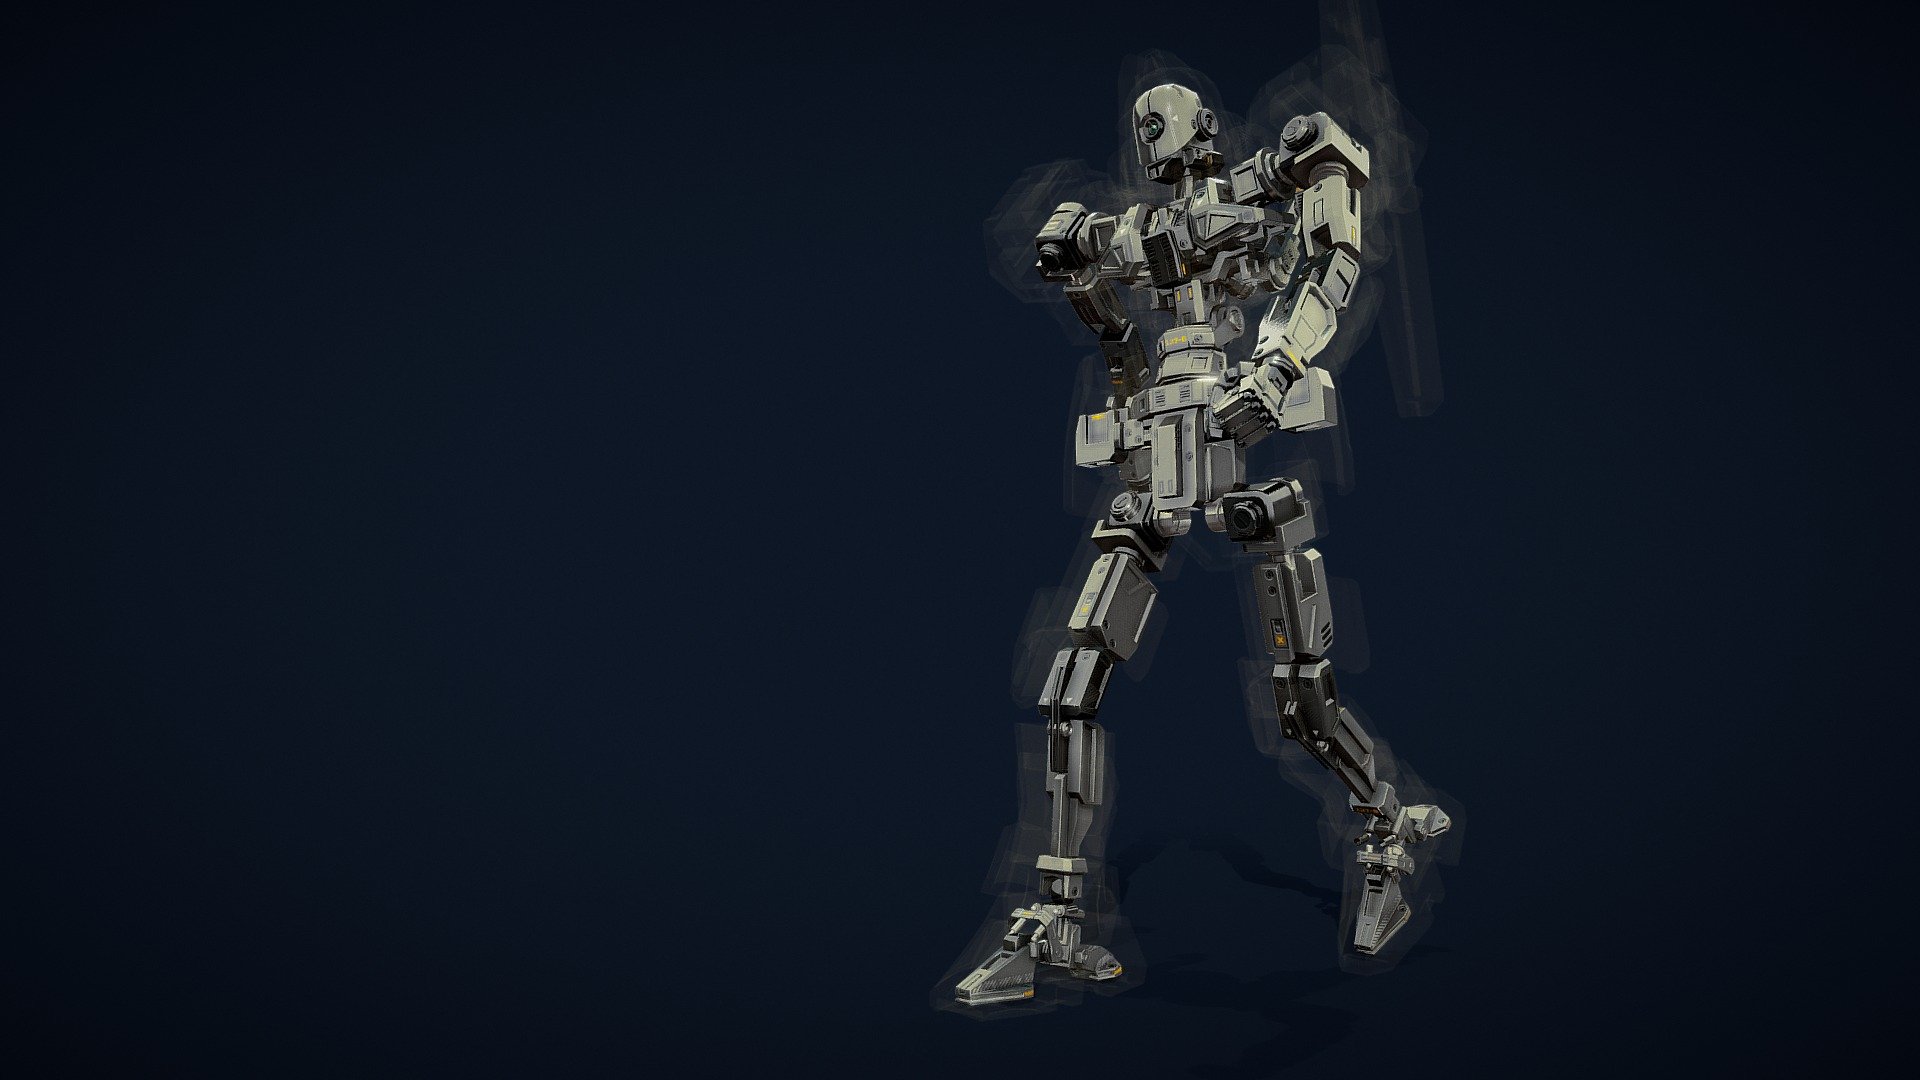 The infantry Class Mech - Gungnir. a machine left from another age, a reminder of the long war.

Overall style inspired by Alan yeoh from his spotlight post
https://blog.sketchfab.com/art-spotlight-r-type-r-9a-arrowhead/?utm_source=website&amp;utm_campaign=newsfeed - Gungnir - Infantry Class - inside view - 3D model by Renham - Camilo Rojas (@renham) 3d model